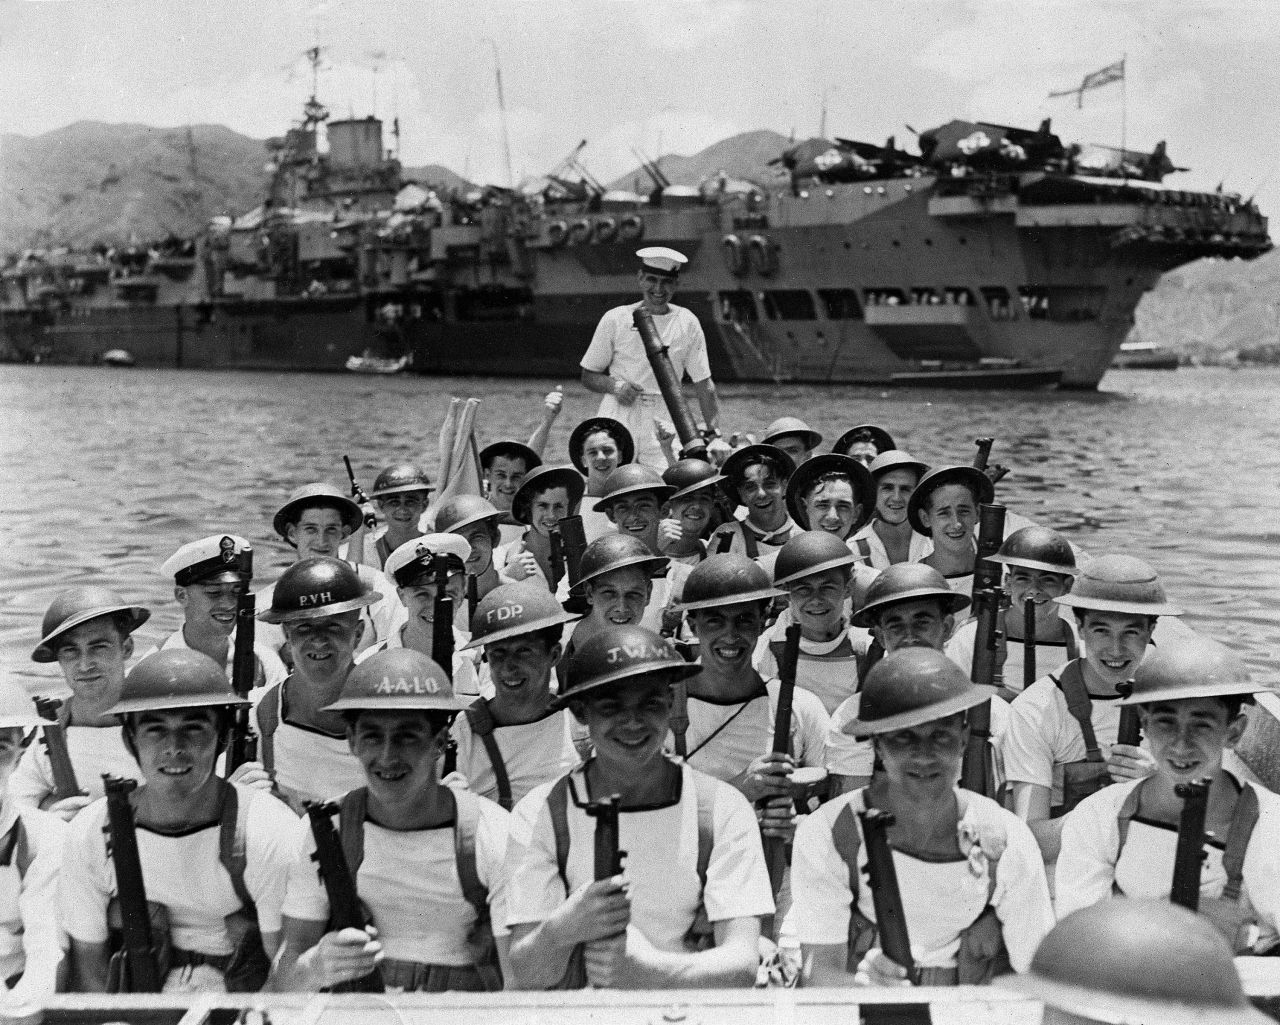 A British landing party leaves the HMS Indomitable aircraft carrier, heading to guard key points on shore as British forces move in to accept Japan's surrender in Hong Kong at the end of World War II in 1945.